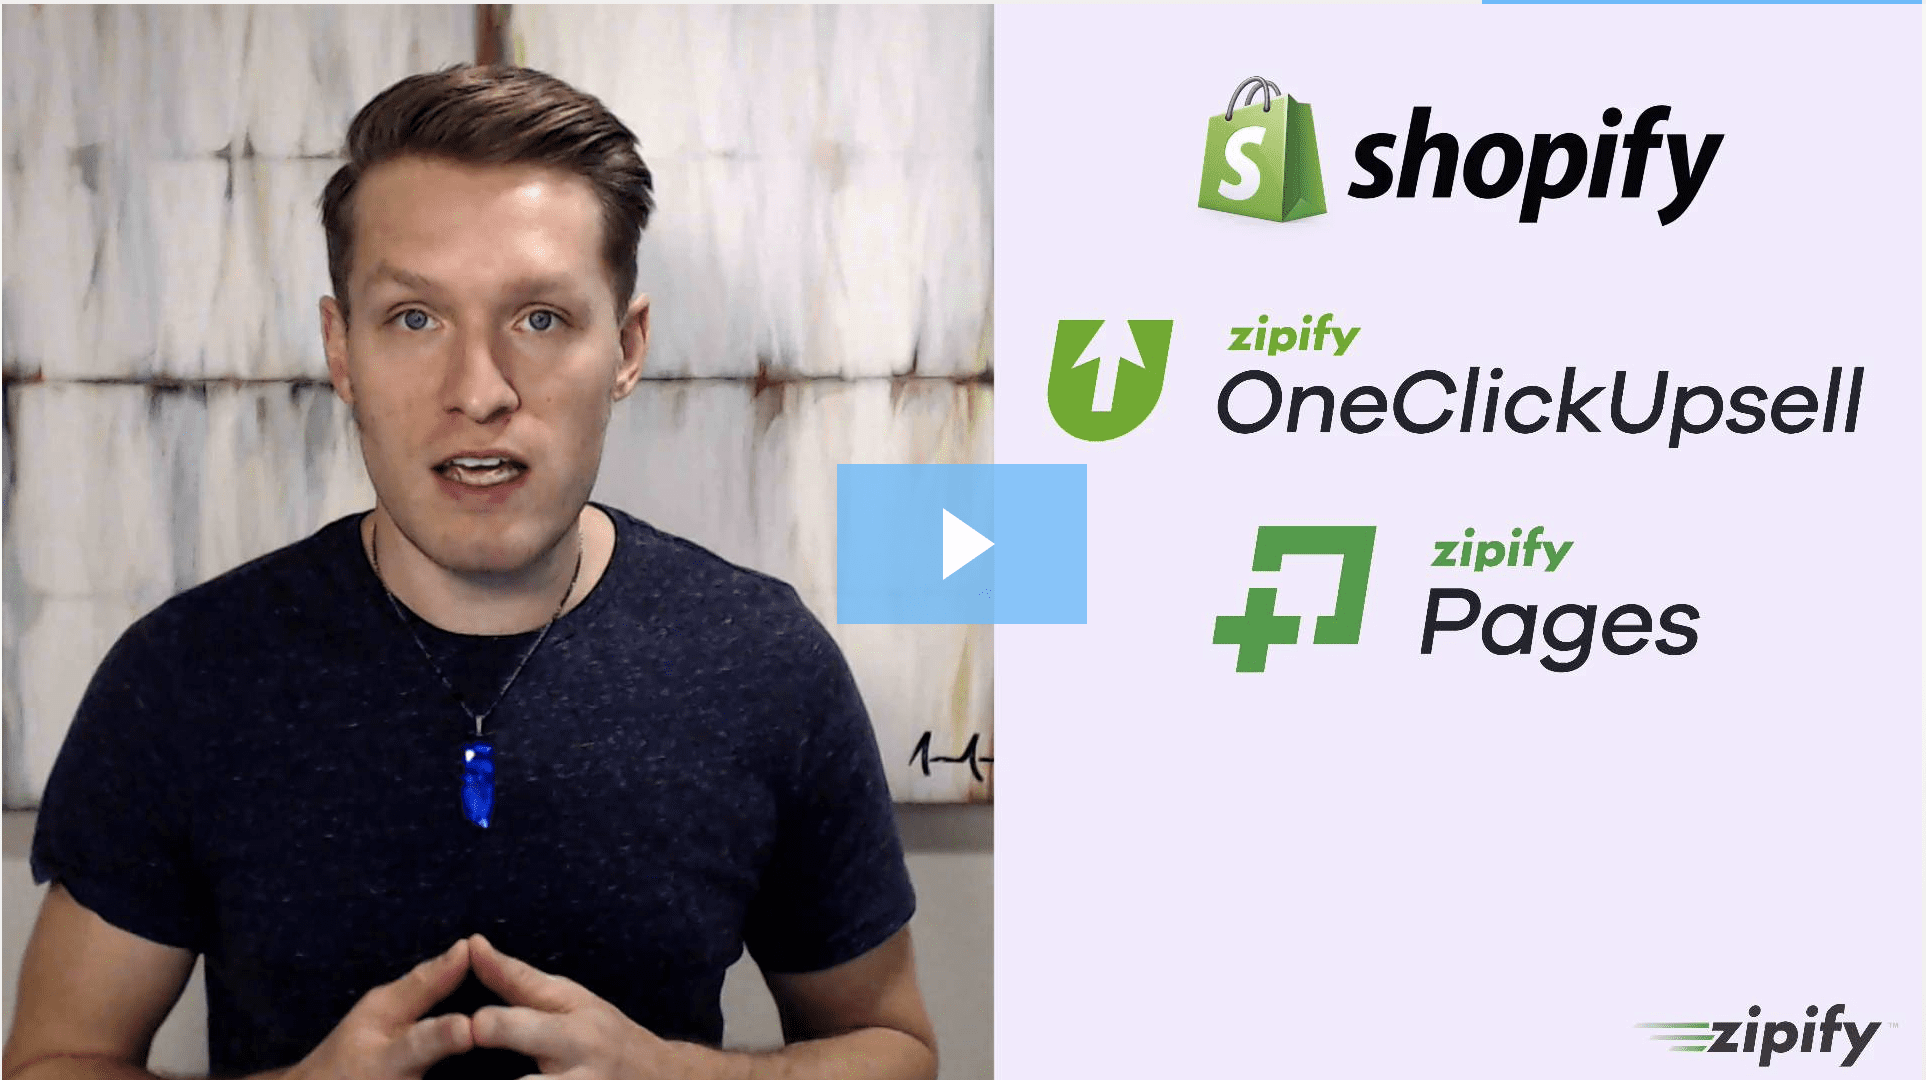 shopify, zipify OneClickUpsell, zipify pages